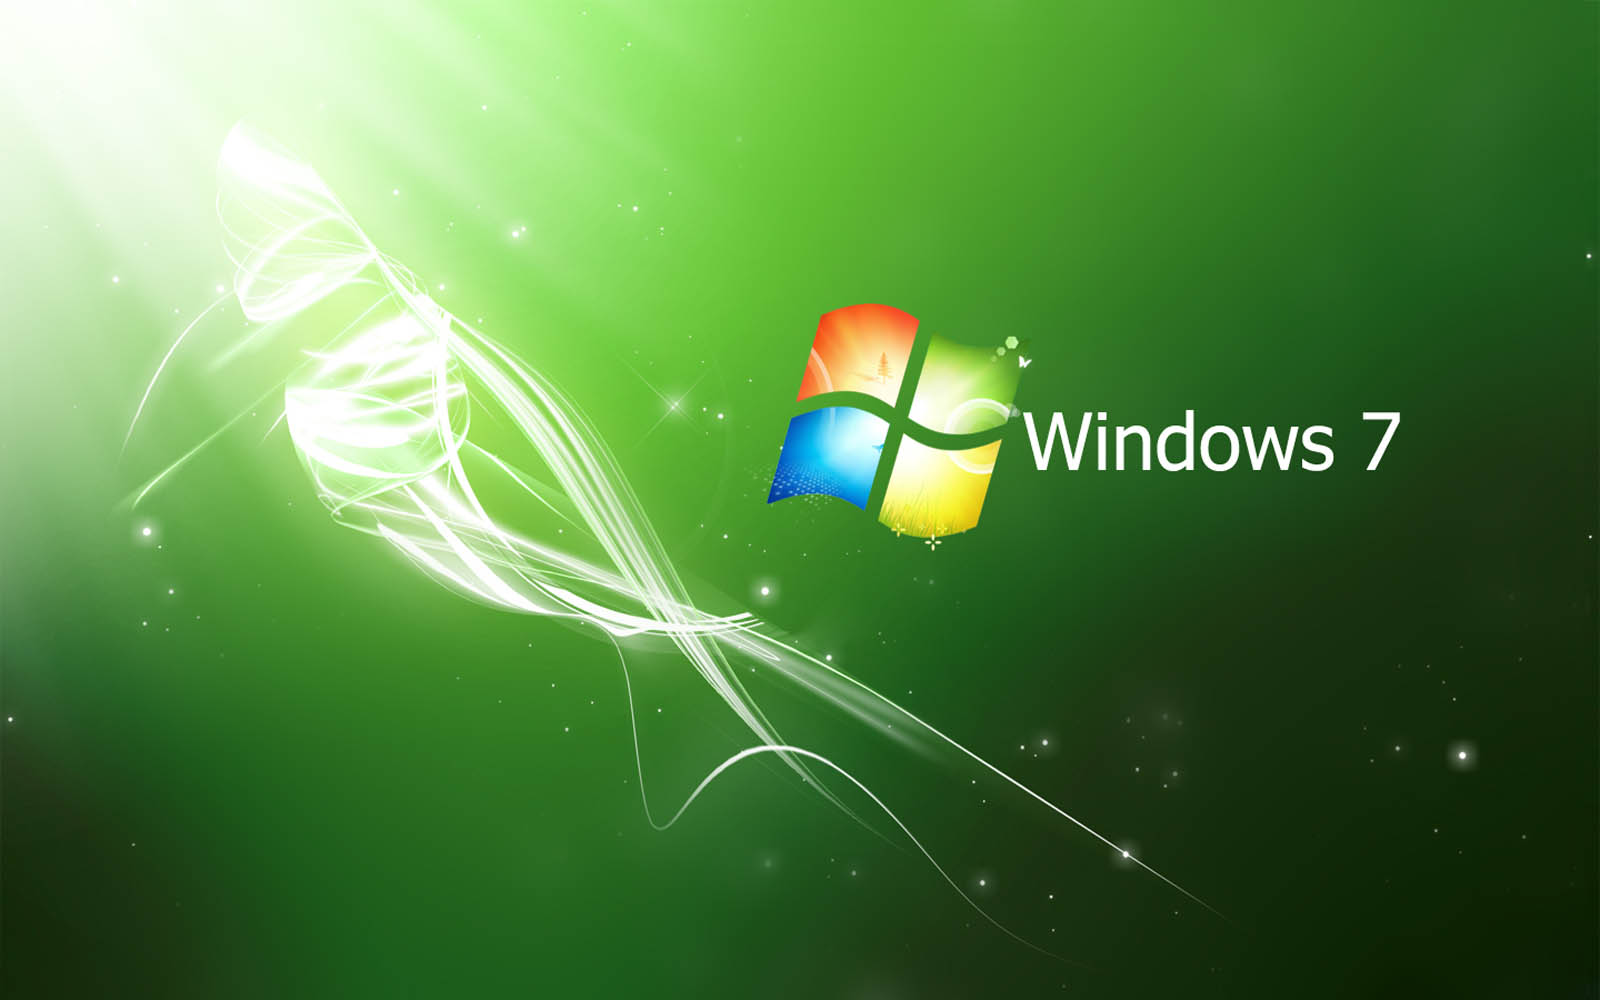 Windows Background Image In Collection